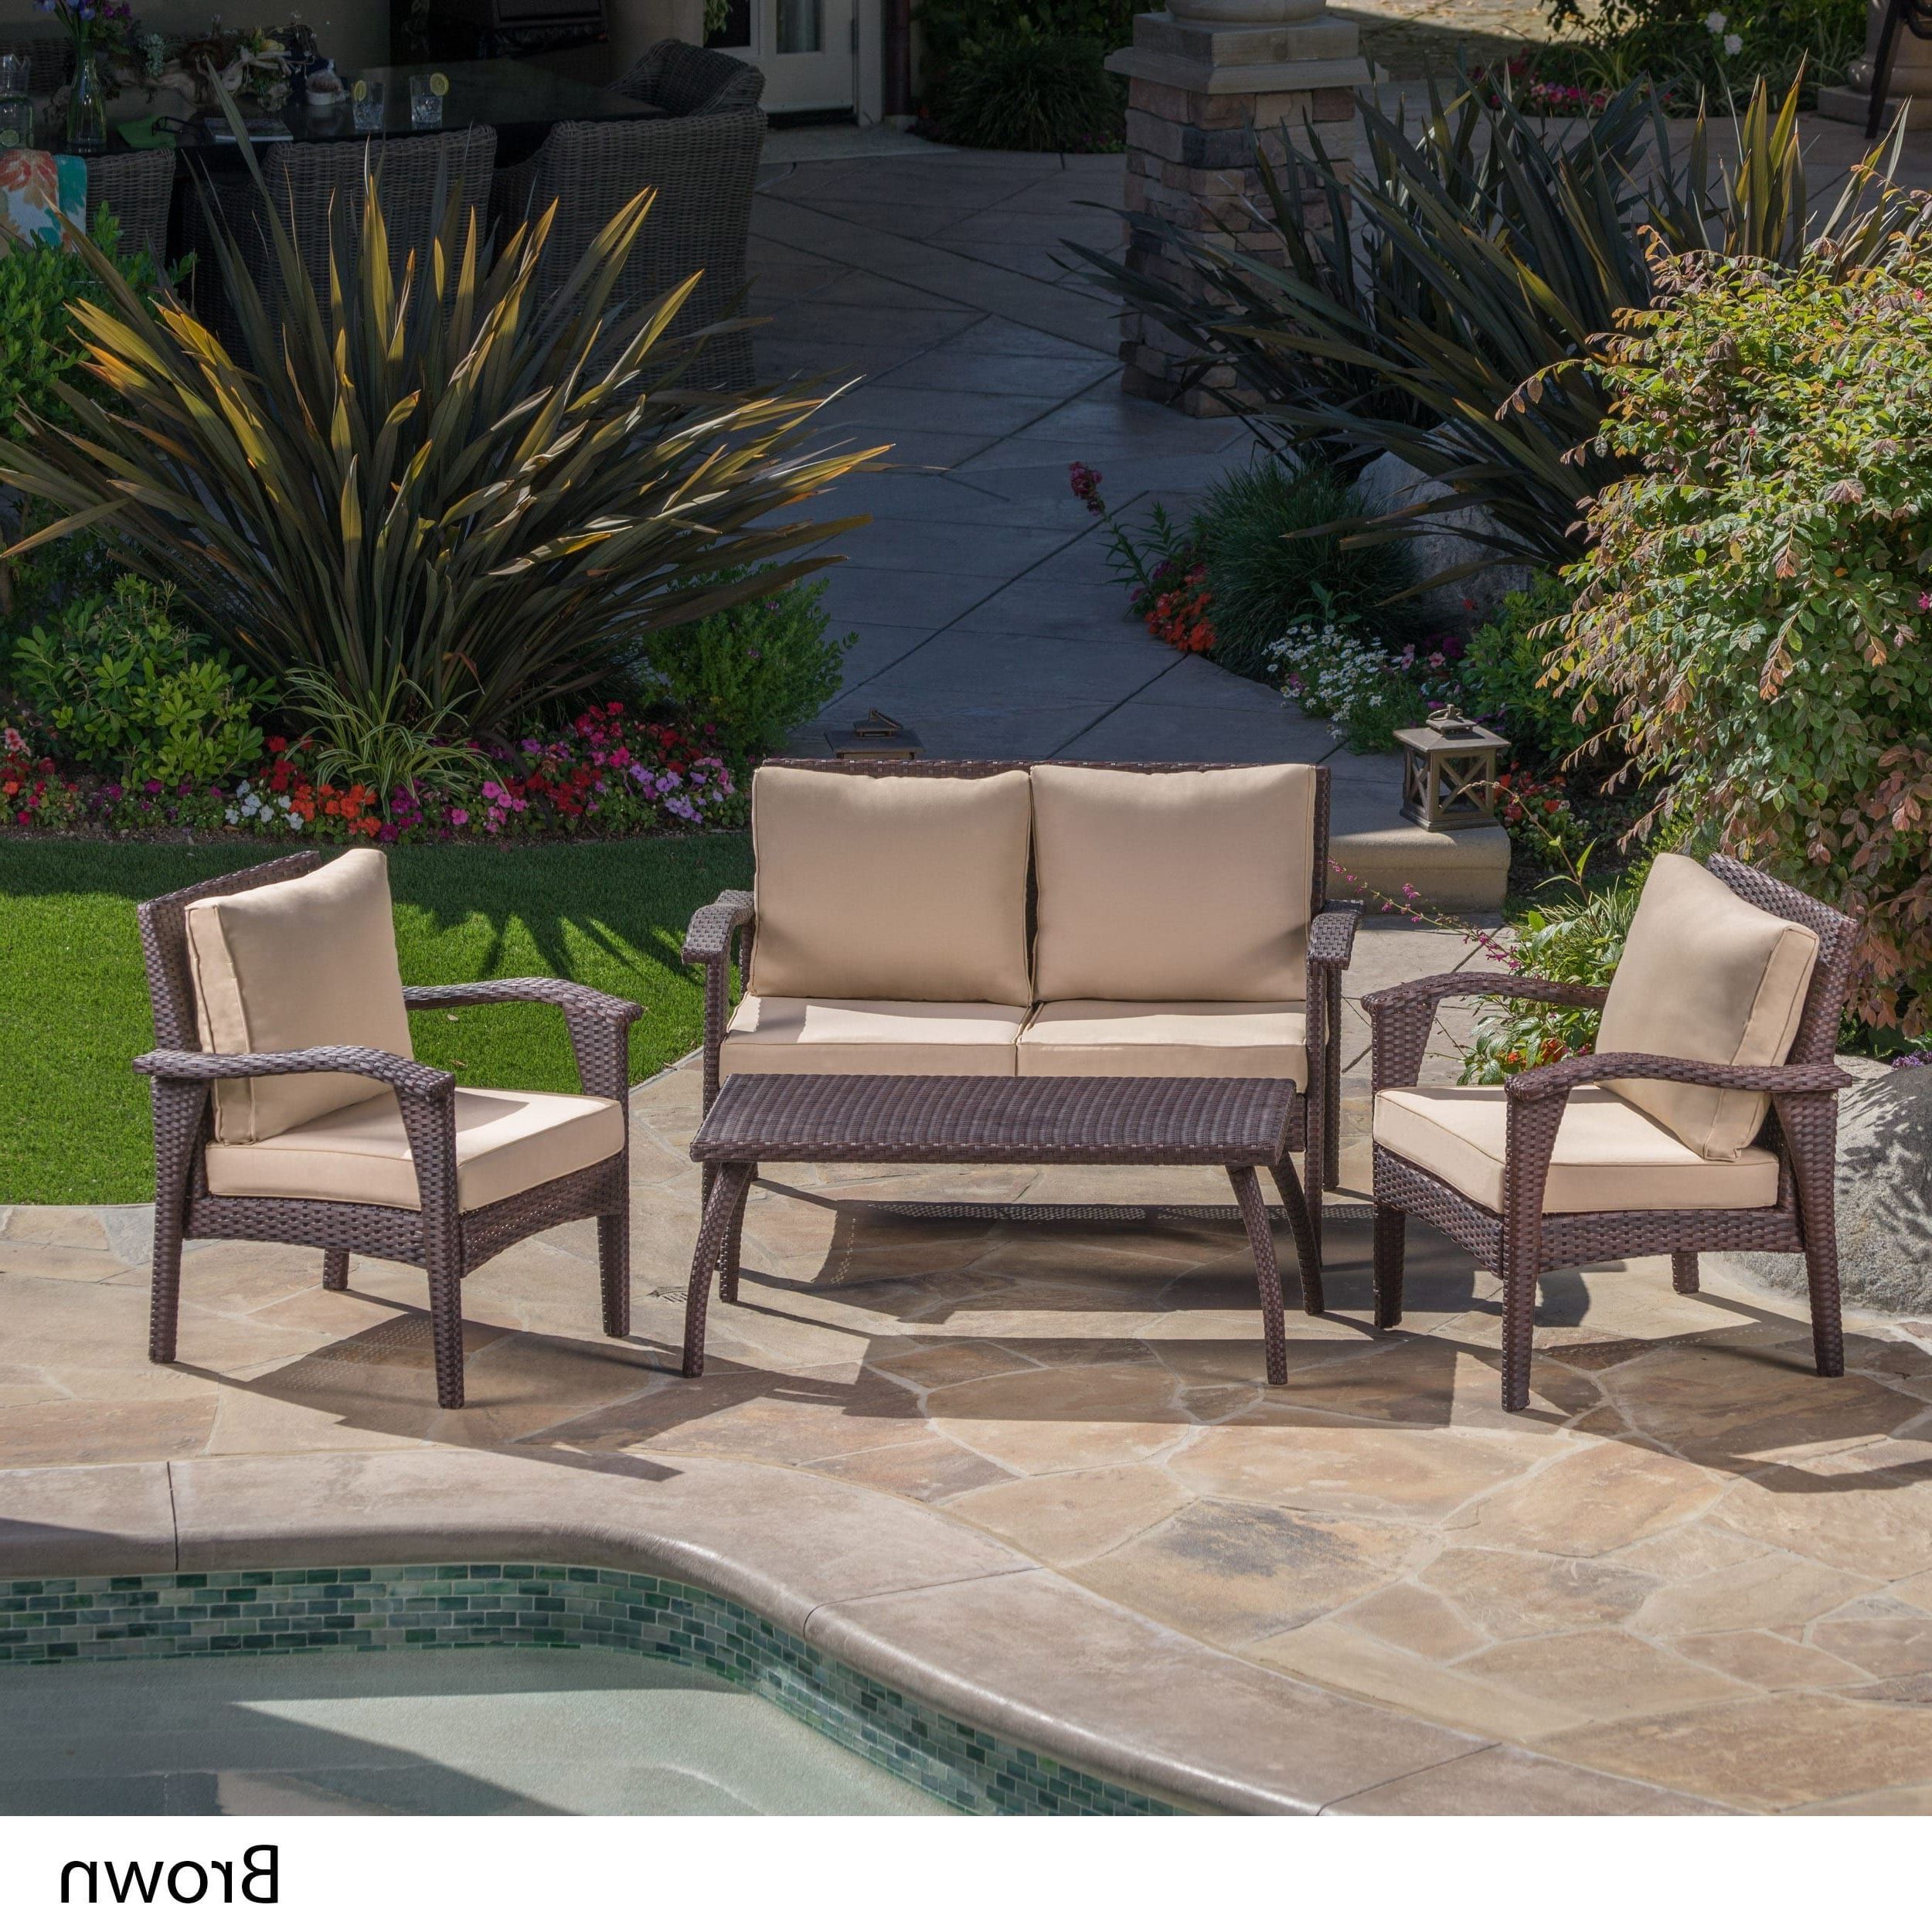 Most Recent Honolulu Outdoor 4 Piece Cushioned Wicker Seating Setchristopher Within Brown Fabric Outdoor Patio Bar Chairs Sets (View 10 of 15)